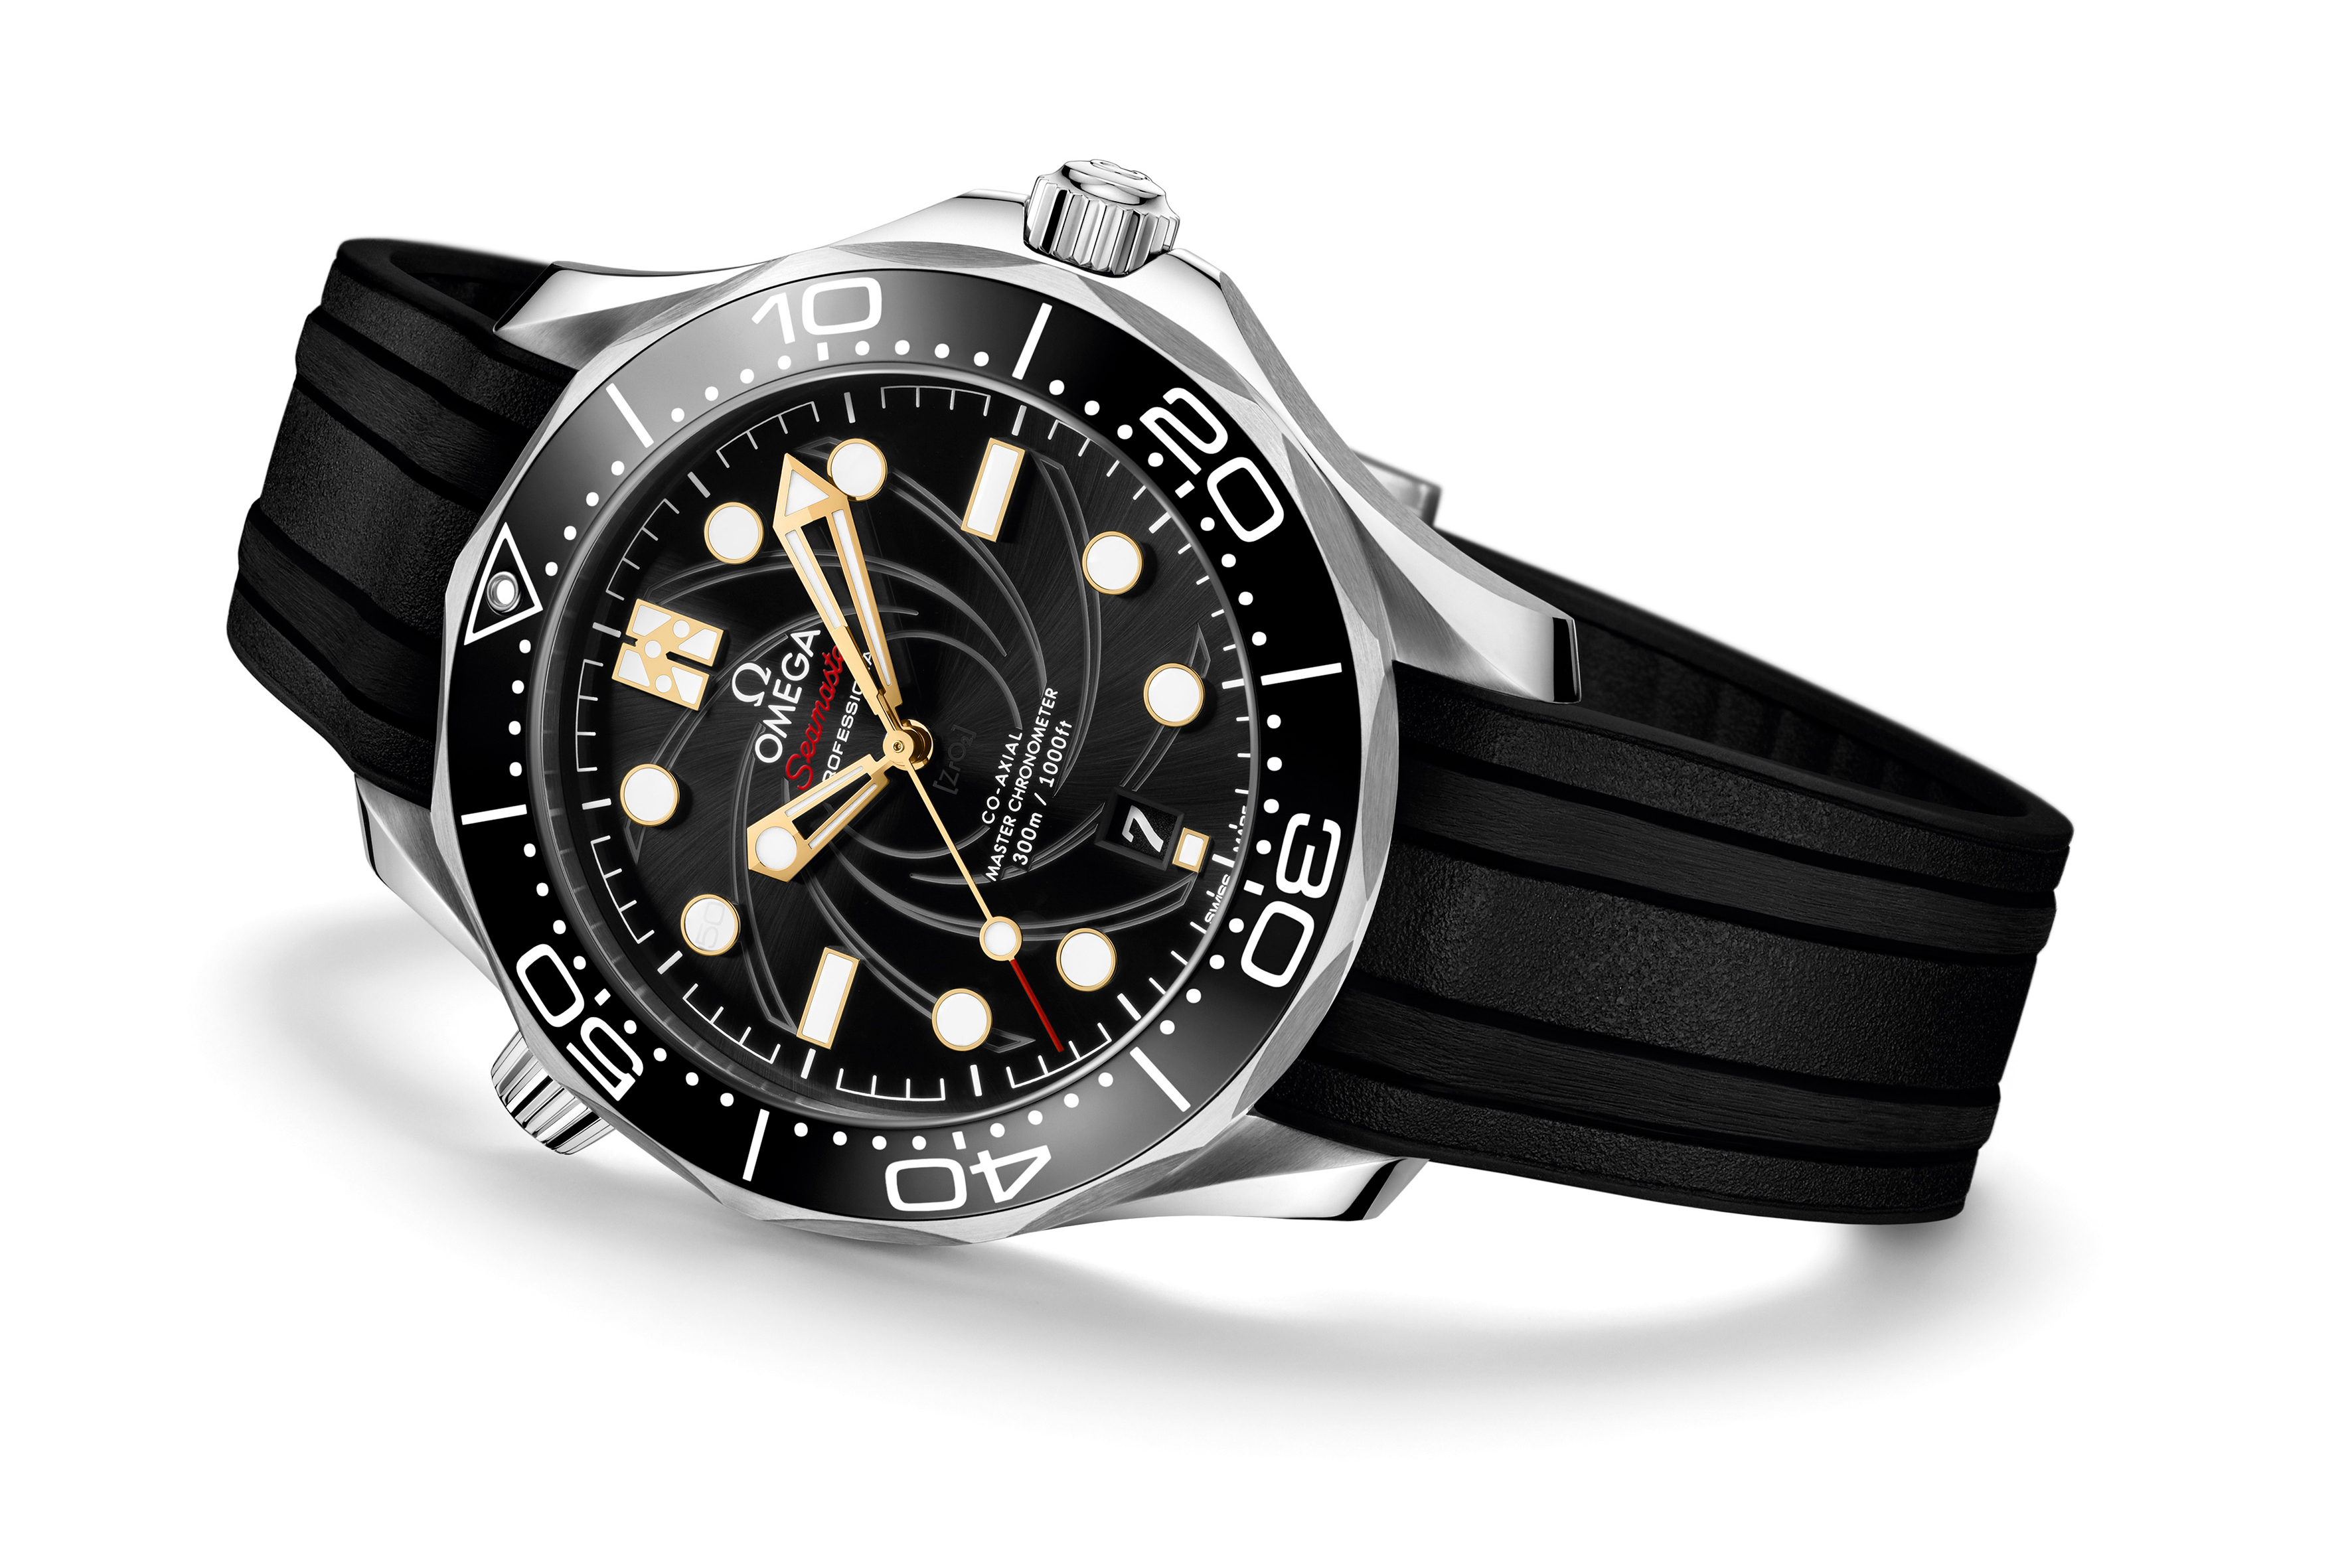 The Omega Seamaster Diver 300M For The 